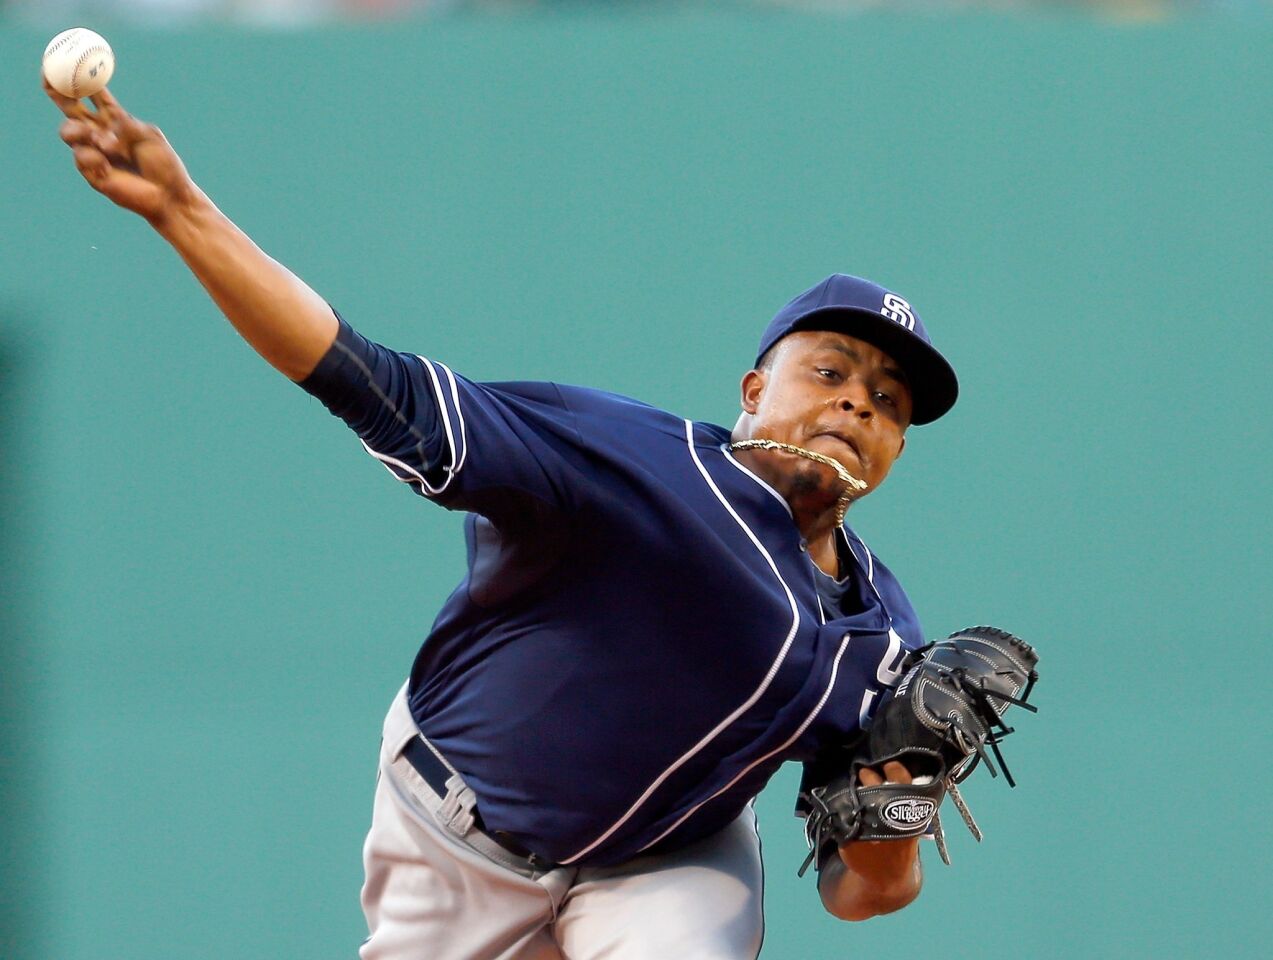 San Diego Padres pitcher Edinson Volquez was suspended 50 games in 2010 after failing a test for performance-enhancing drugs while with the Cincinnati Reds.